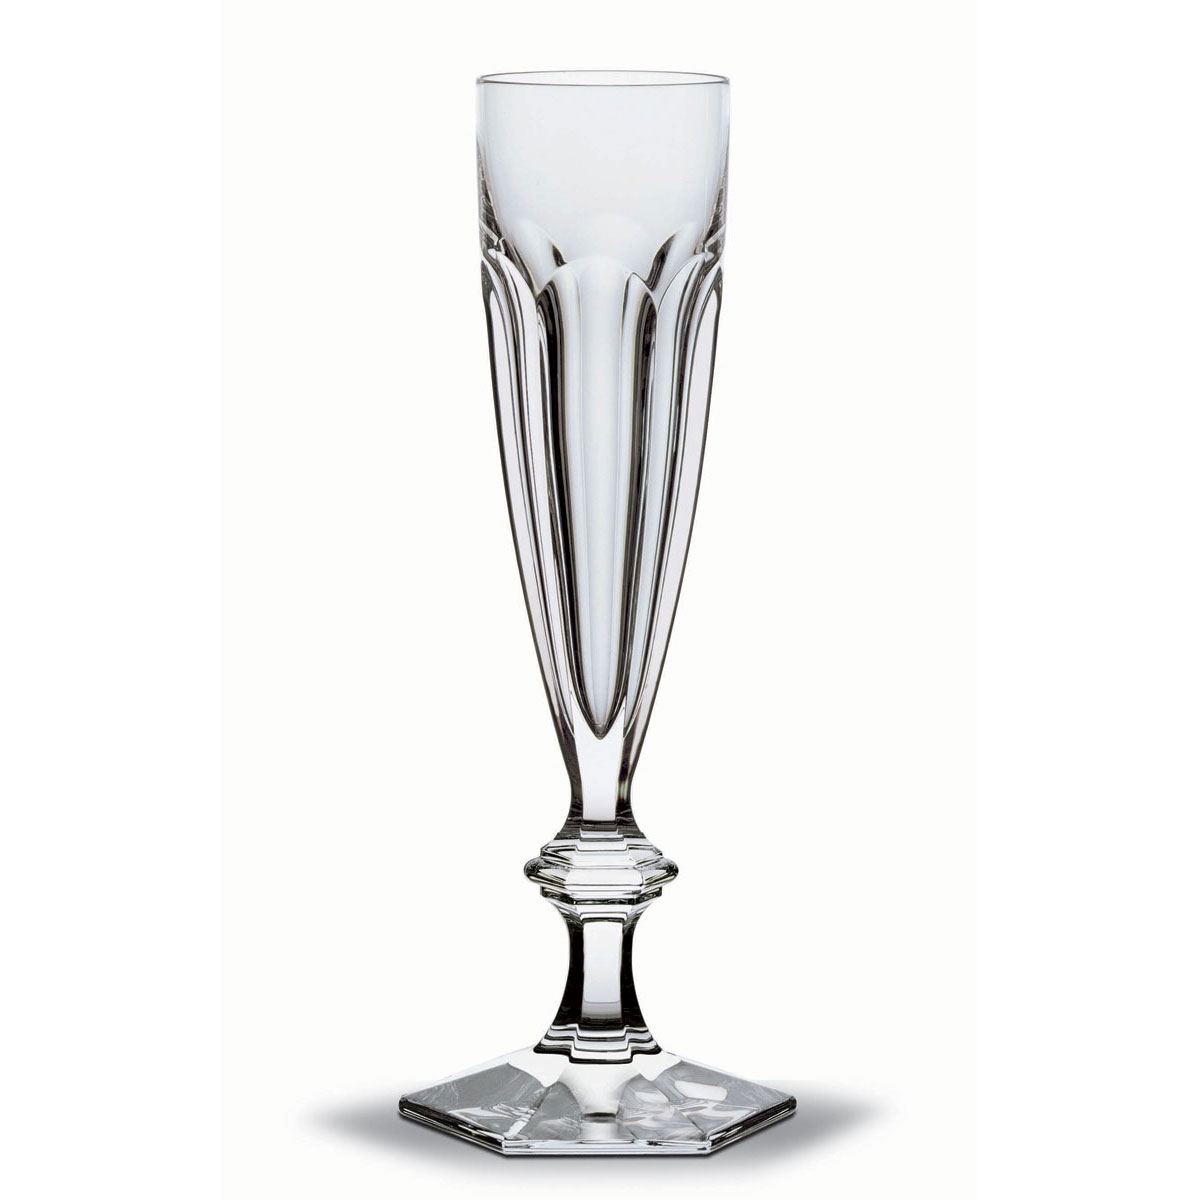 Baccarat Crystal, Harcourt Tall Champagne Crystal Flute, Single